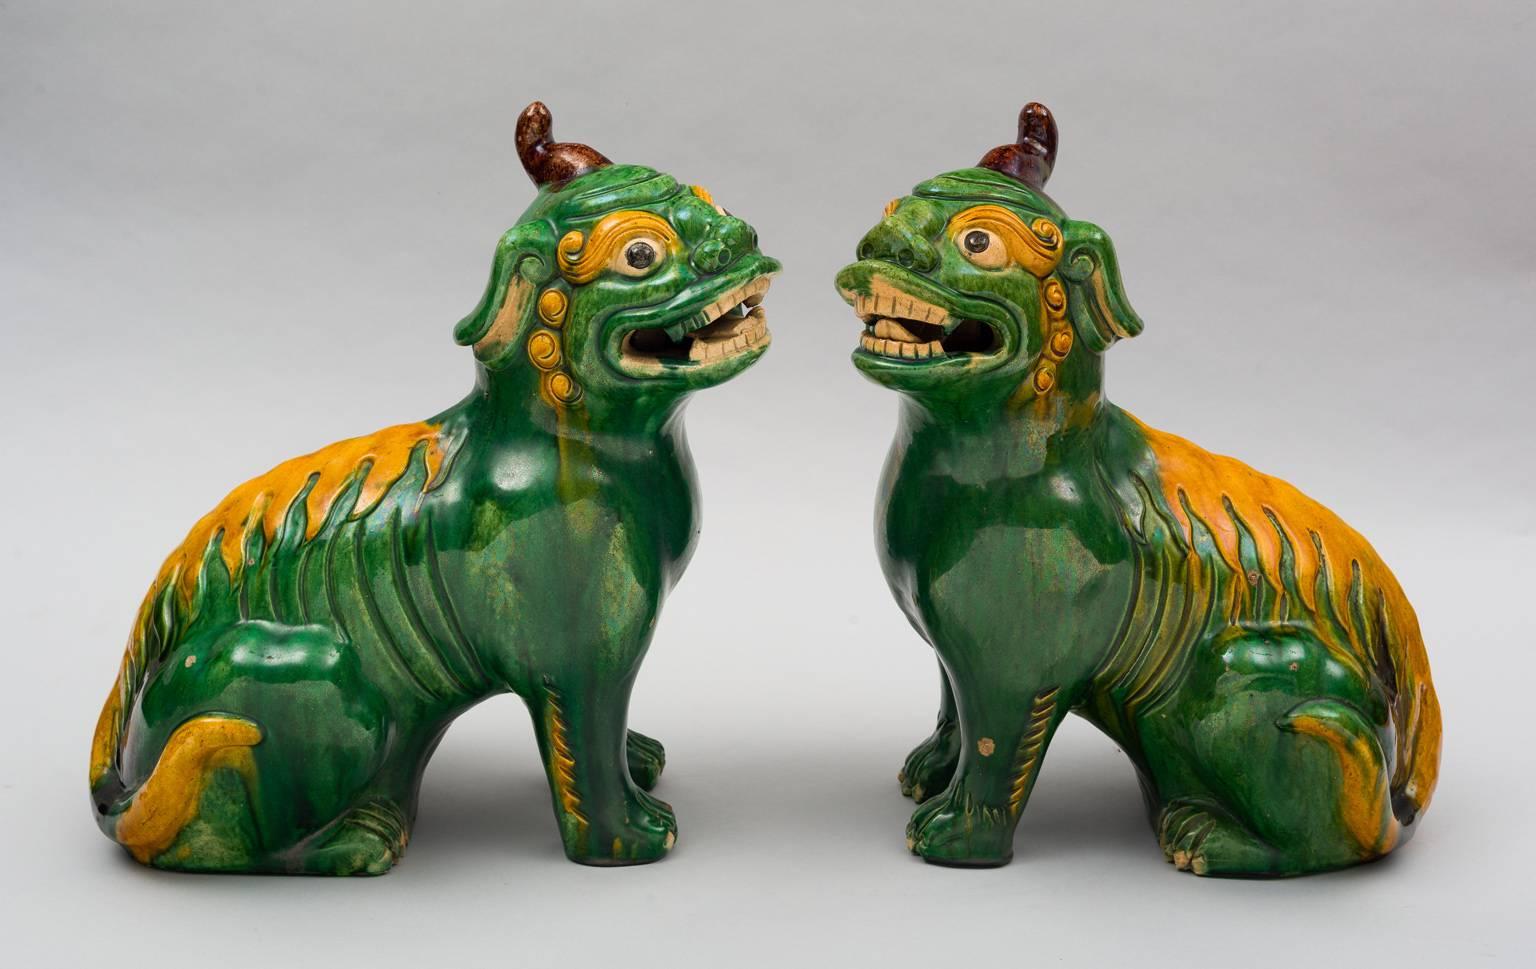 Pair of Chinese glazed pottery free standing, wild looking mythical beasts with open mouths, teeth, lolling tongues, bulging eyes and a single brown horn atop their heads. Polychrome decoration of a yellow fire pattern down their backs on a green